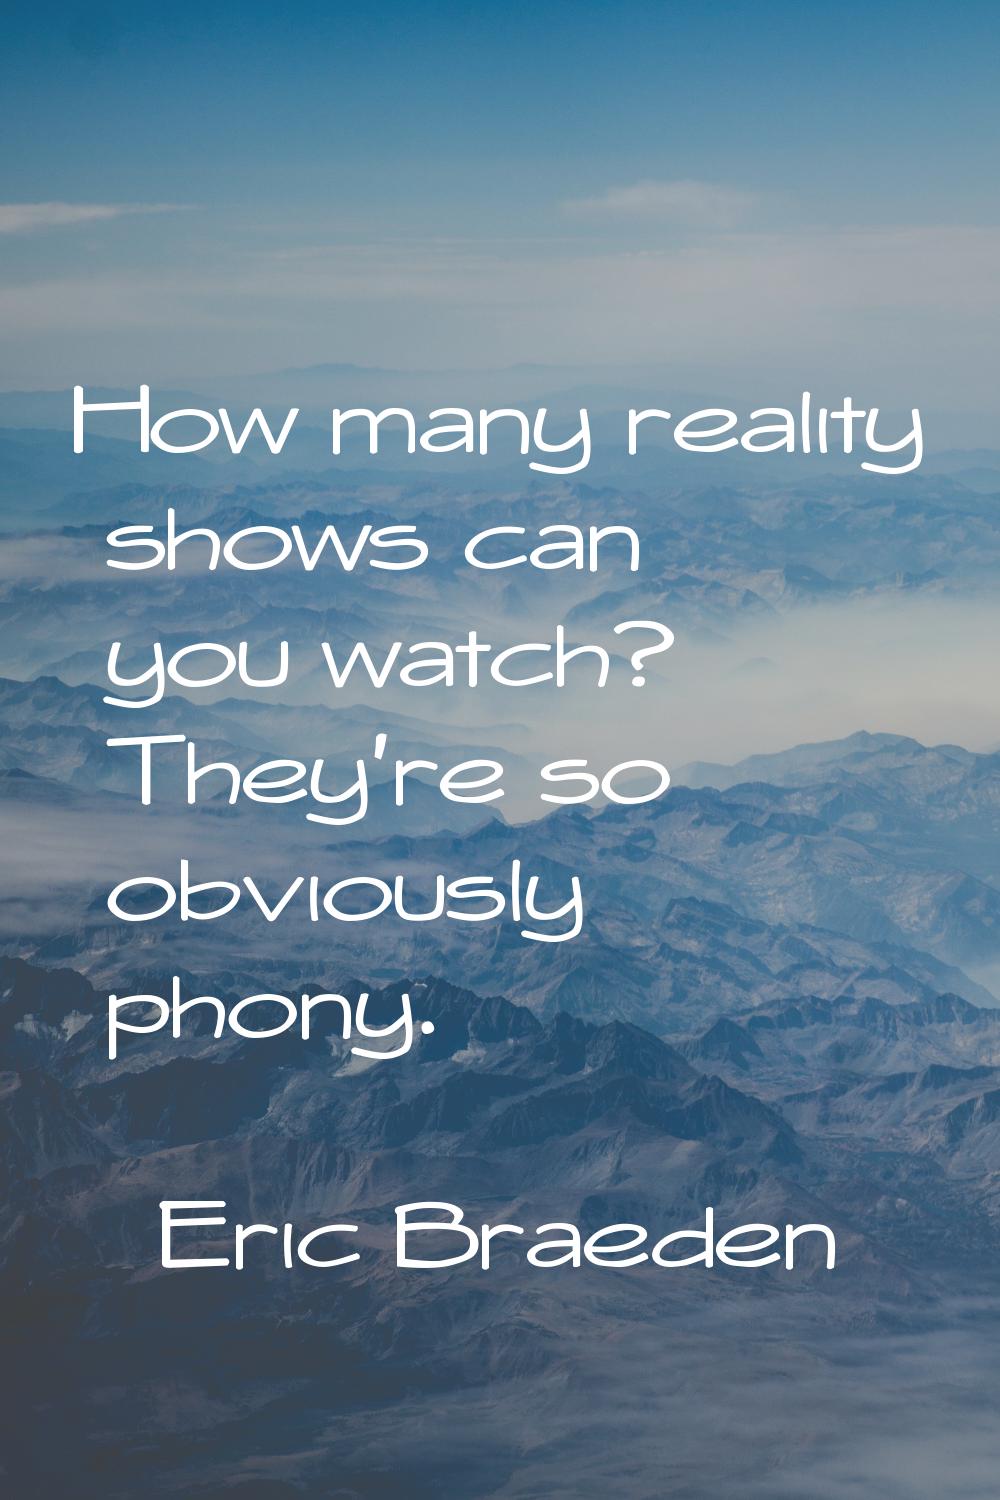 How many reality shows can you watch? They're so obviously phony.